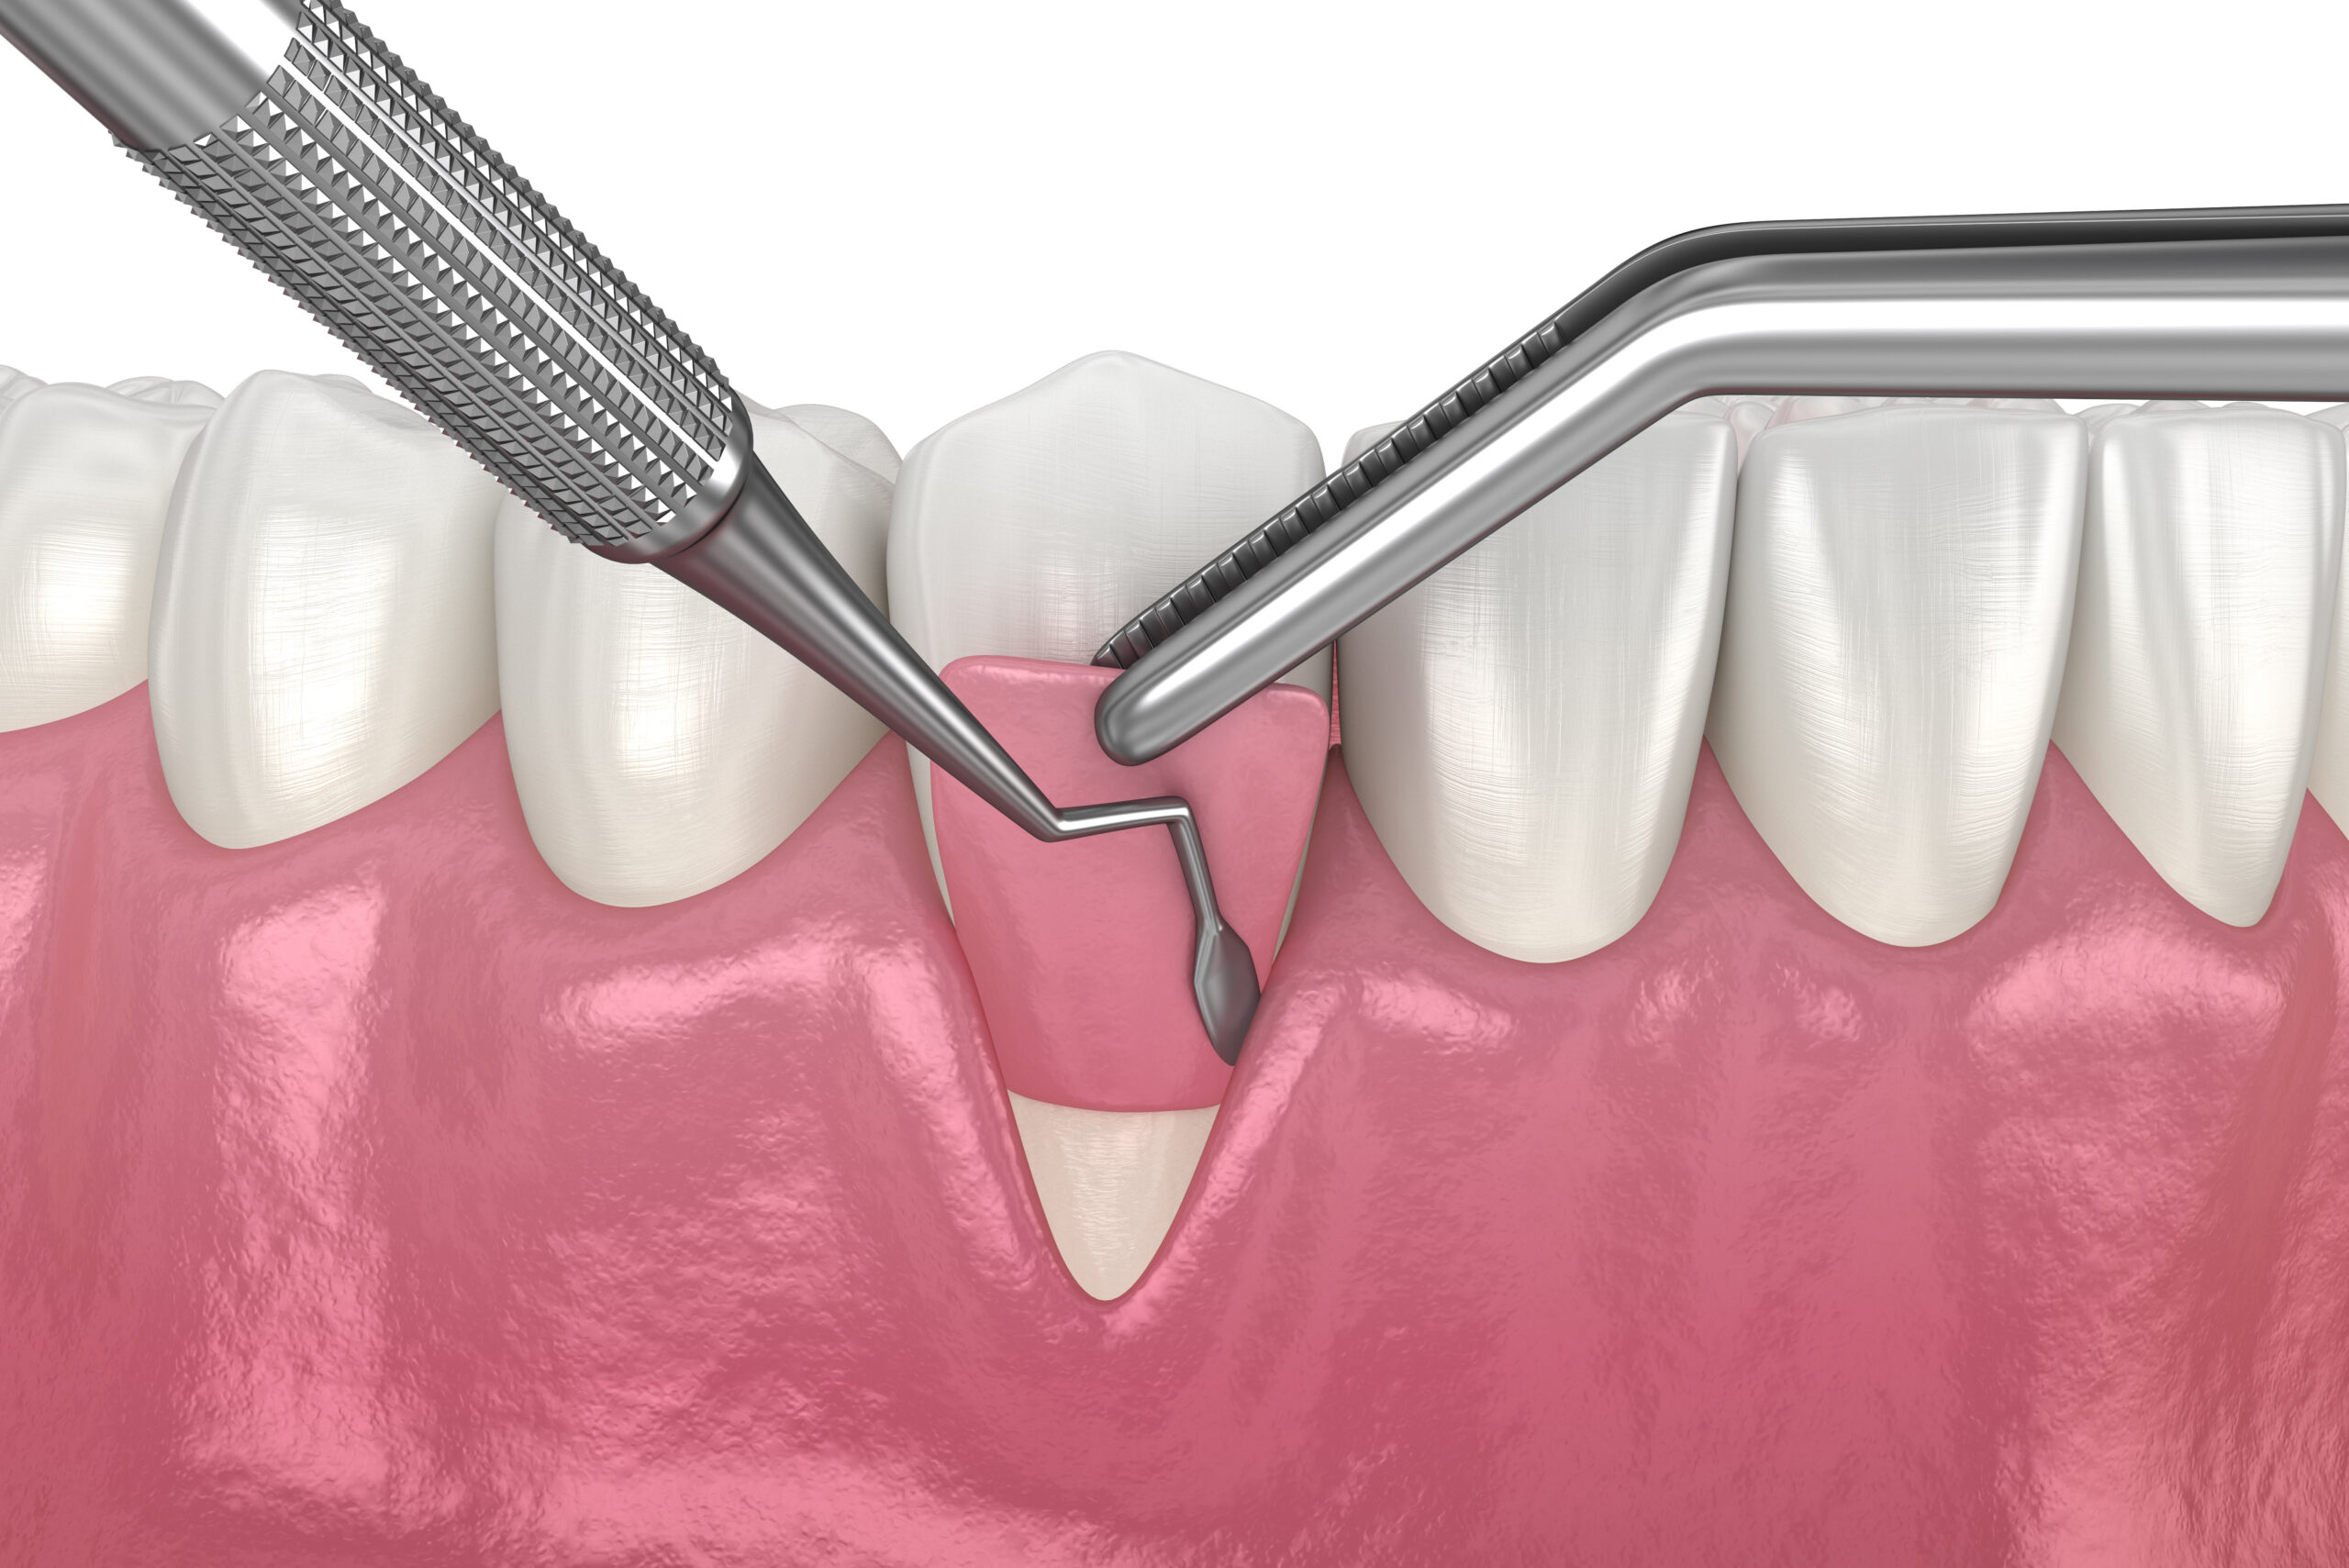 Failed Gum Graft? Here Is What to Do